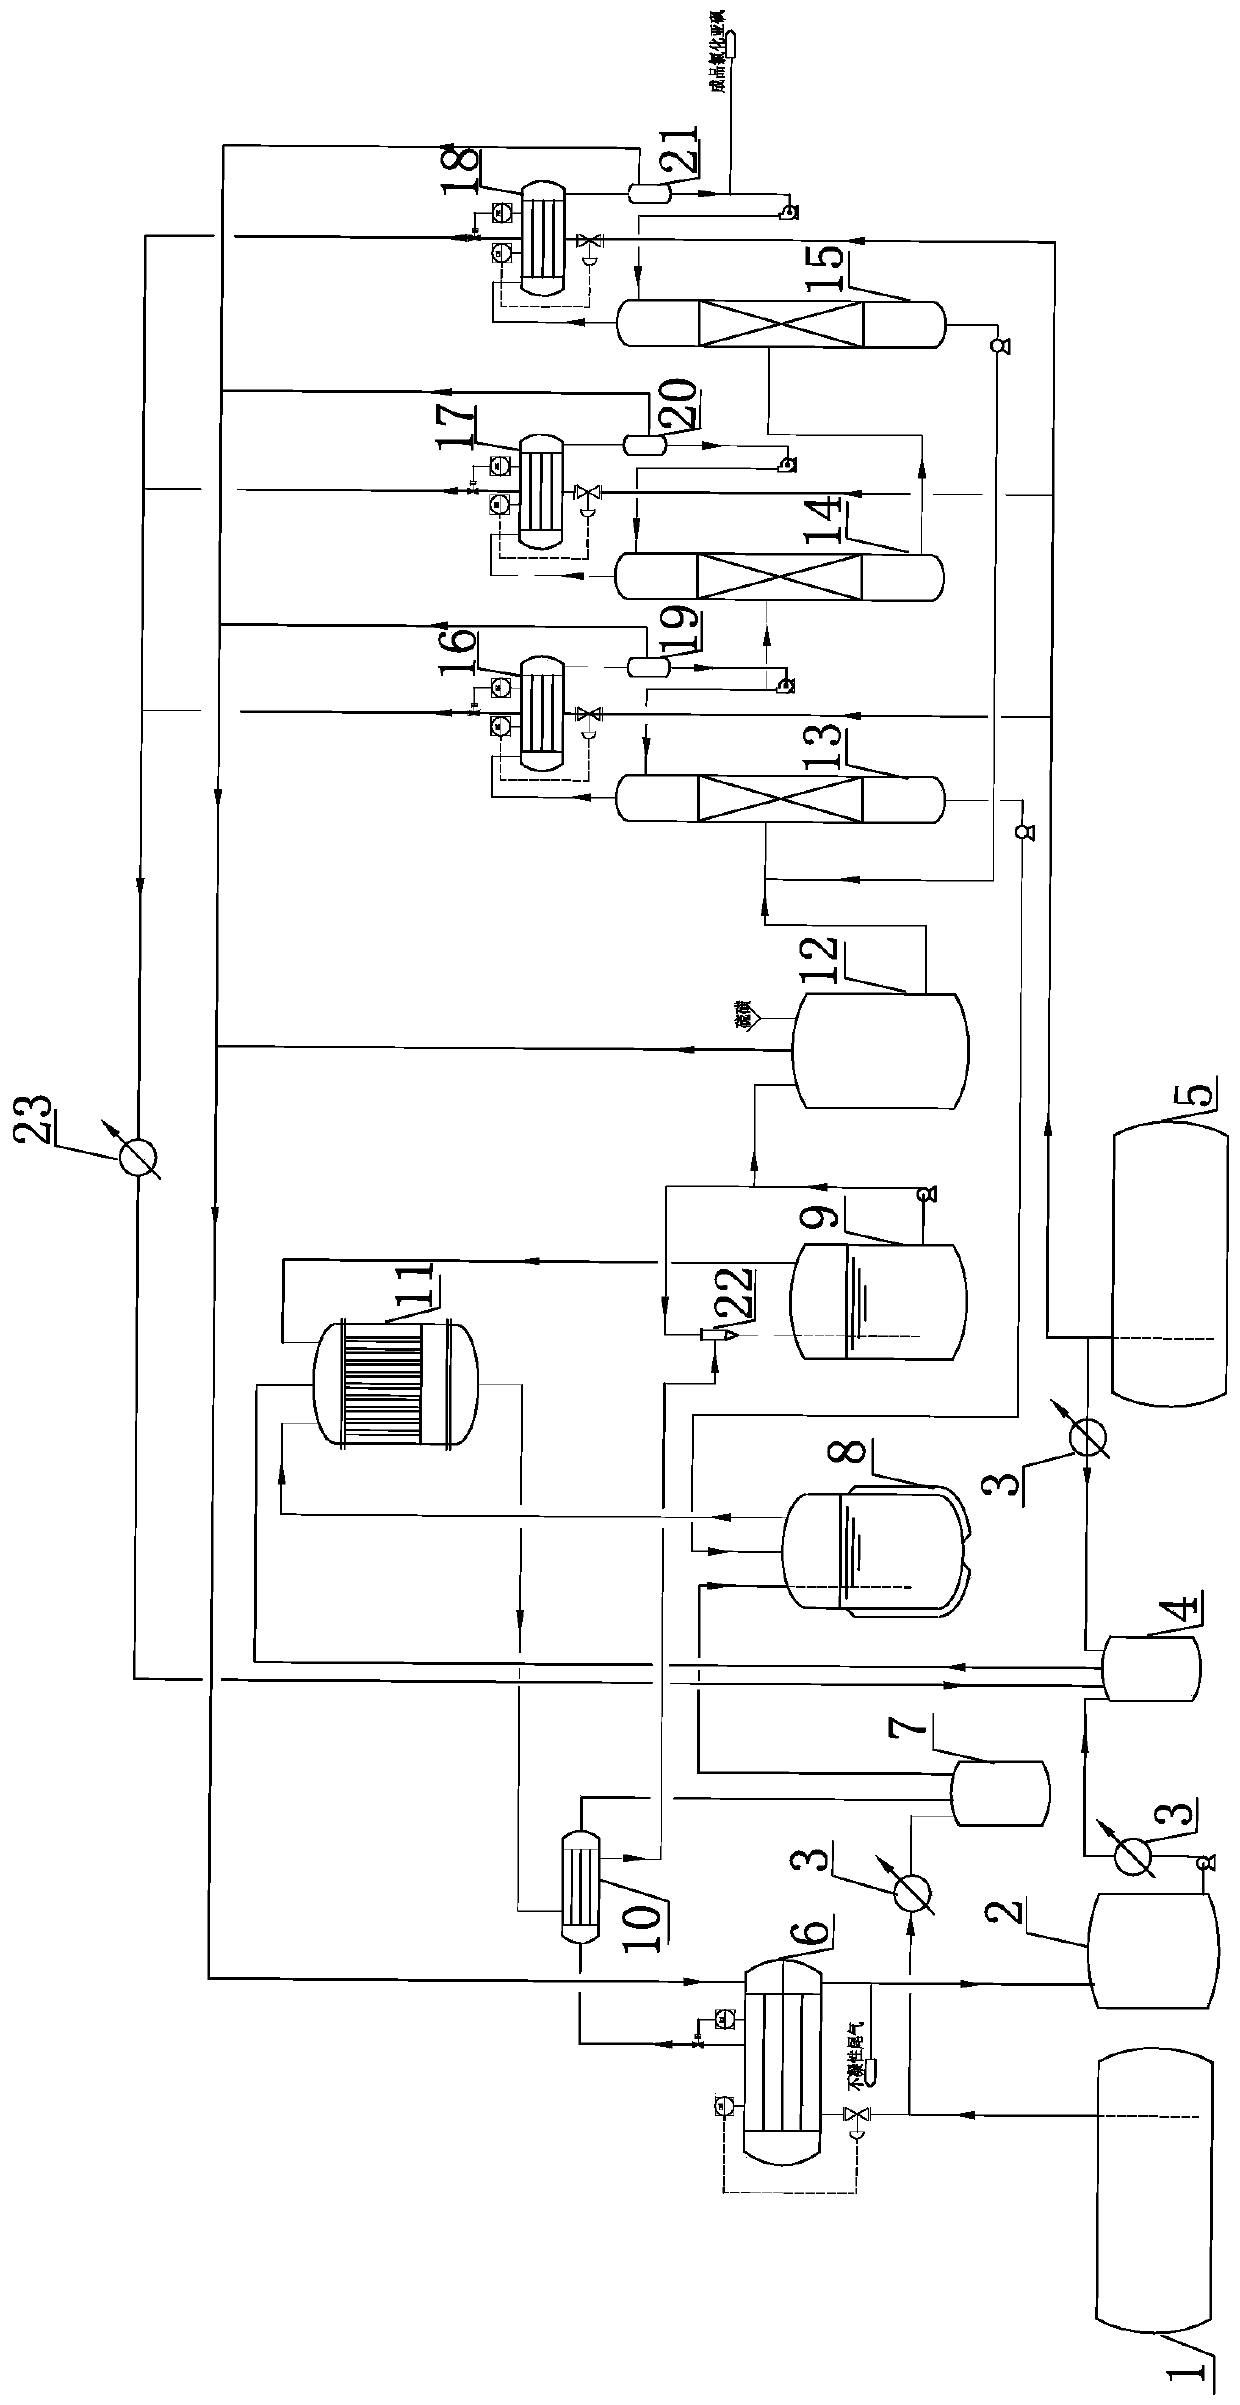 Thionyl chloride production system